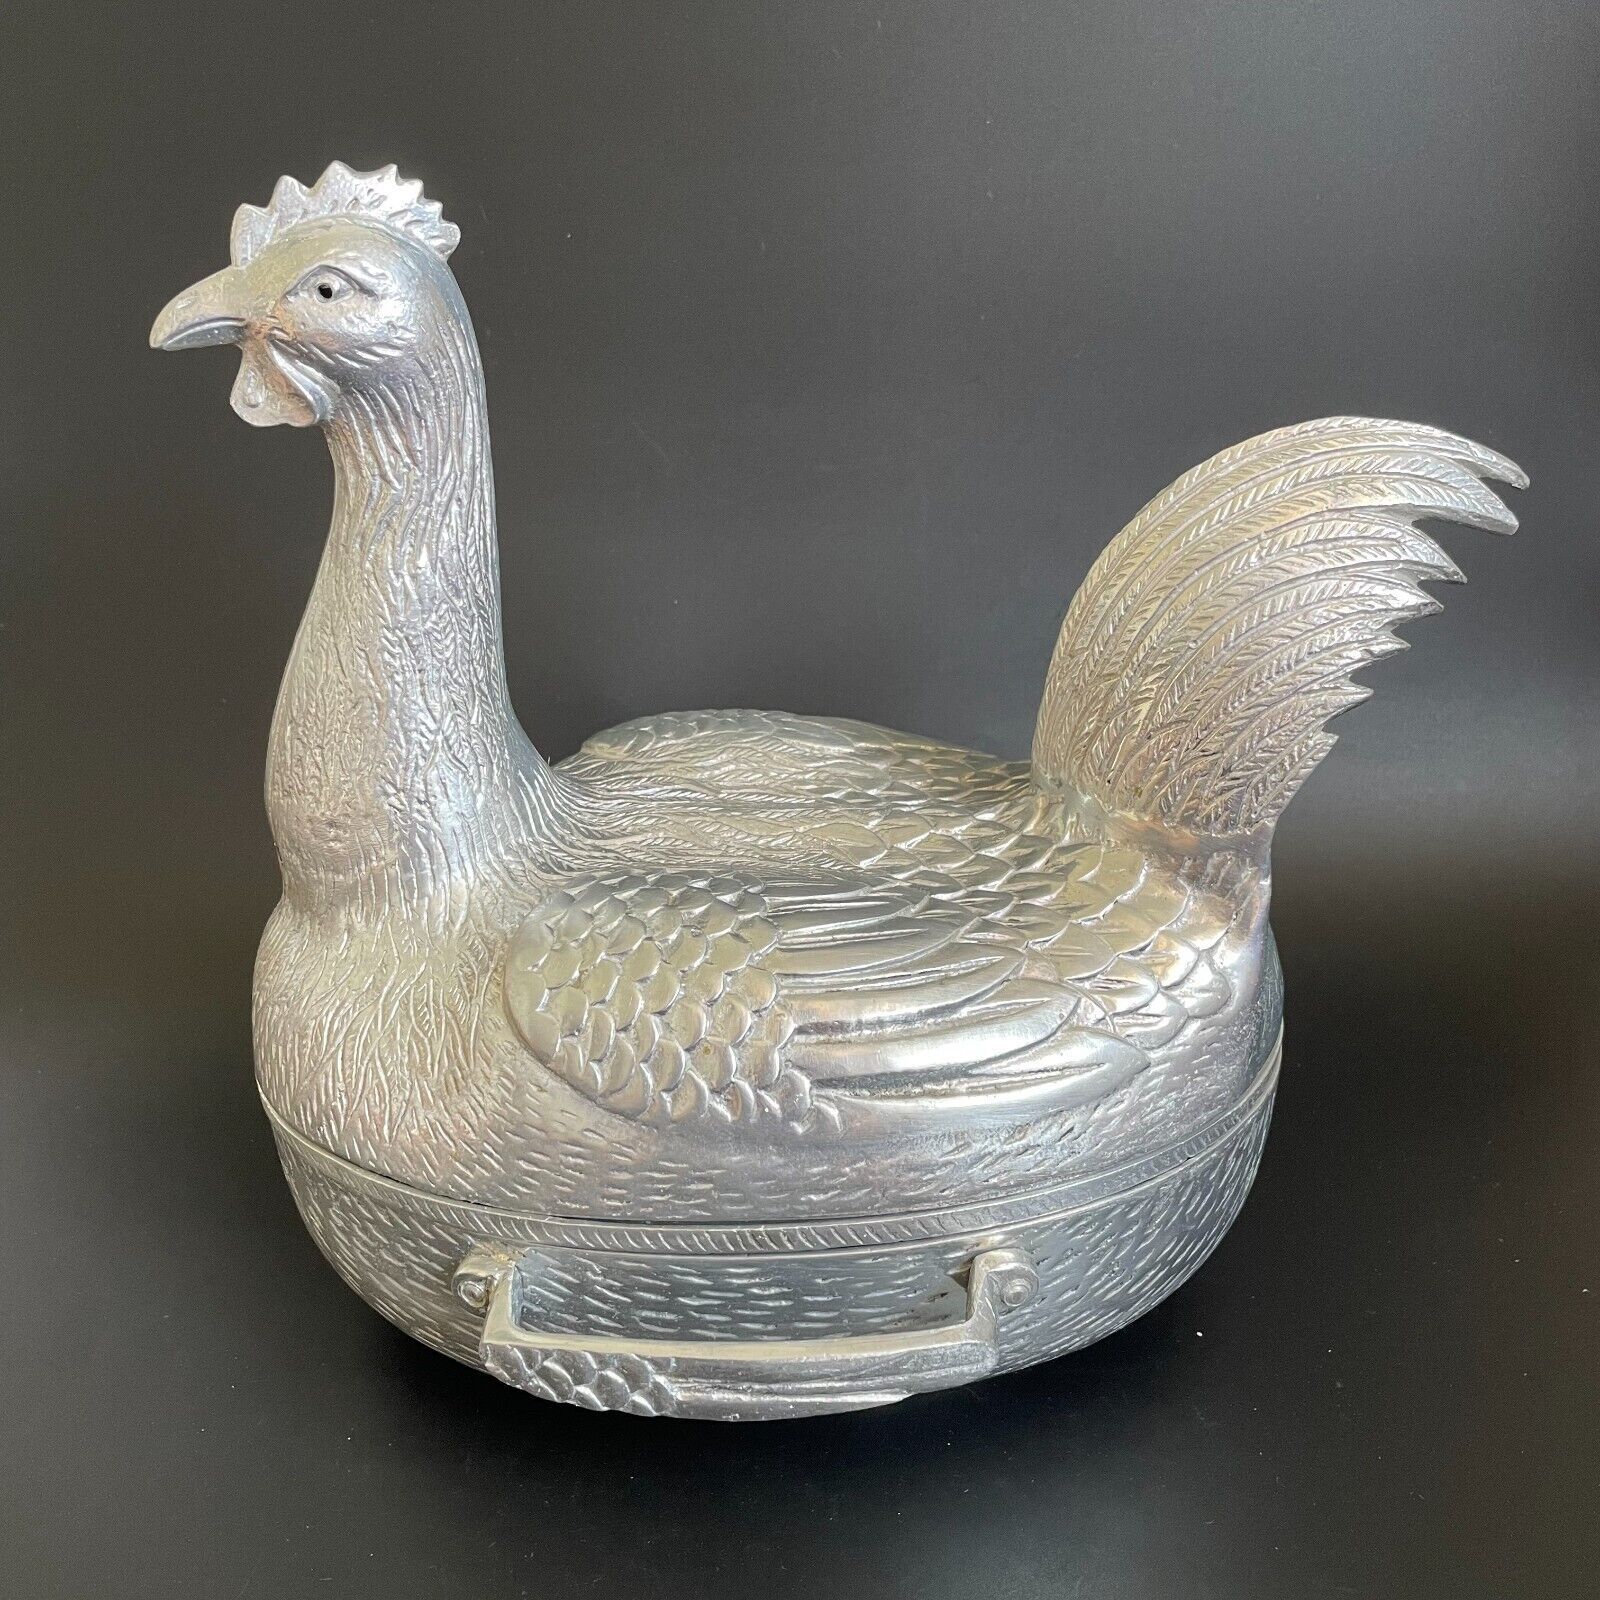 Vintage 1977 Arthur Court Rooster 3-Piece Baked Eggs Covered Serving Dish - $375.00